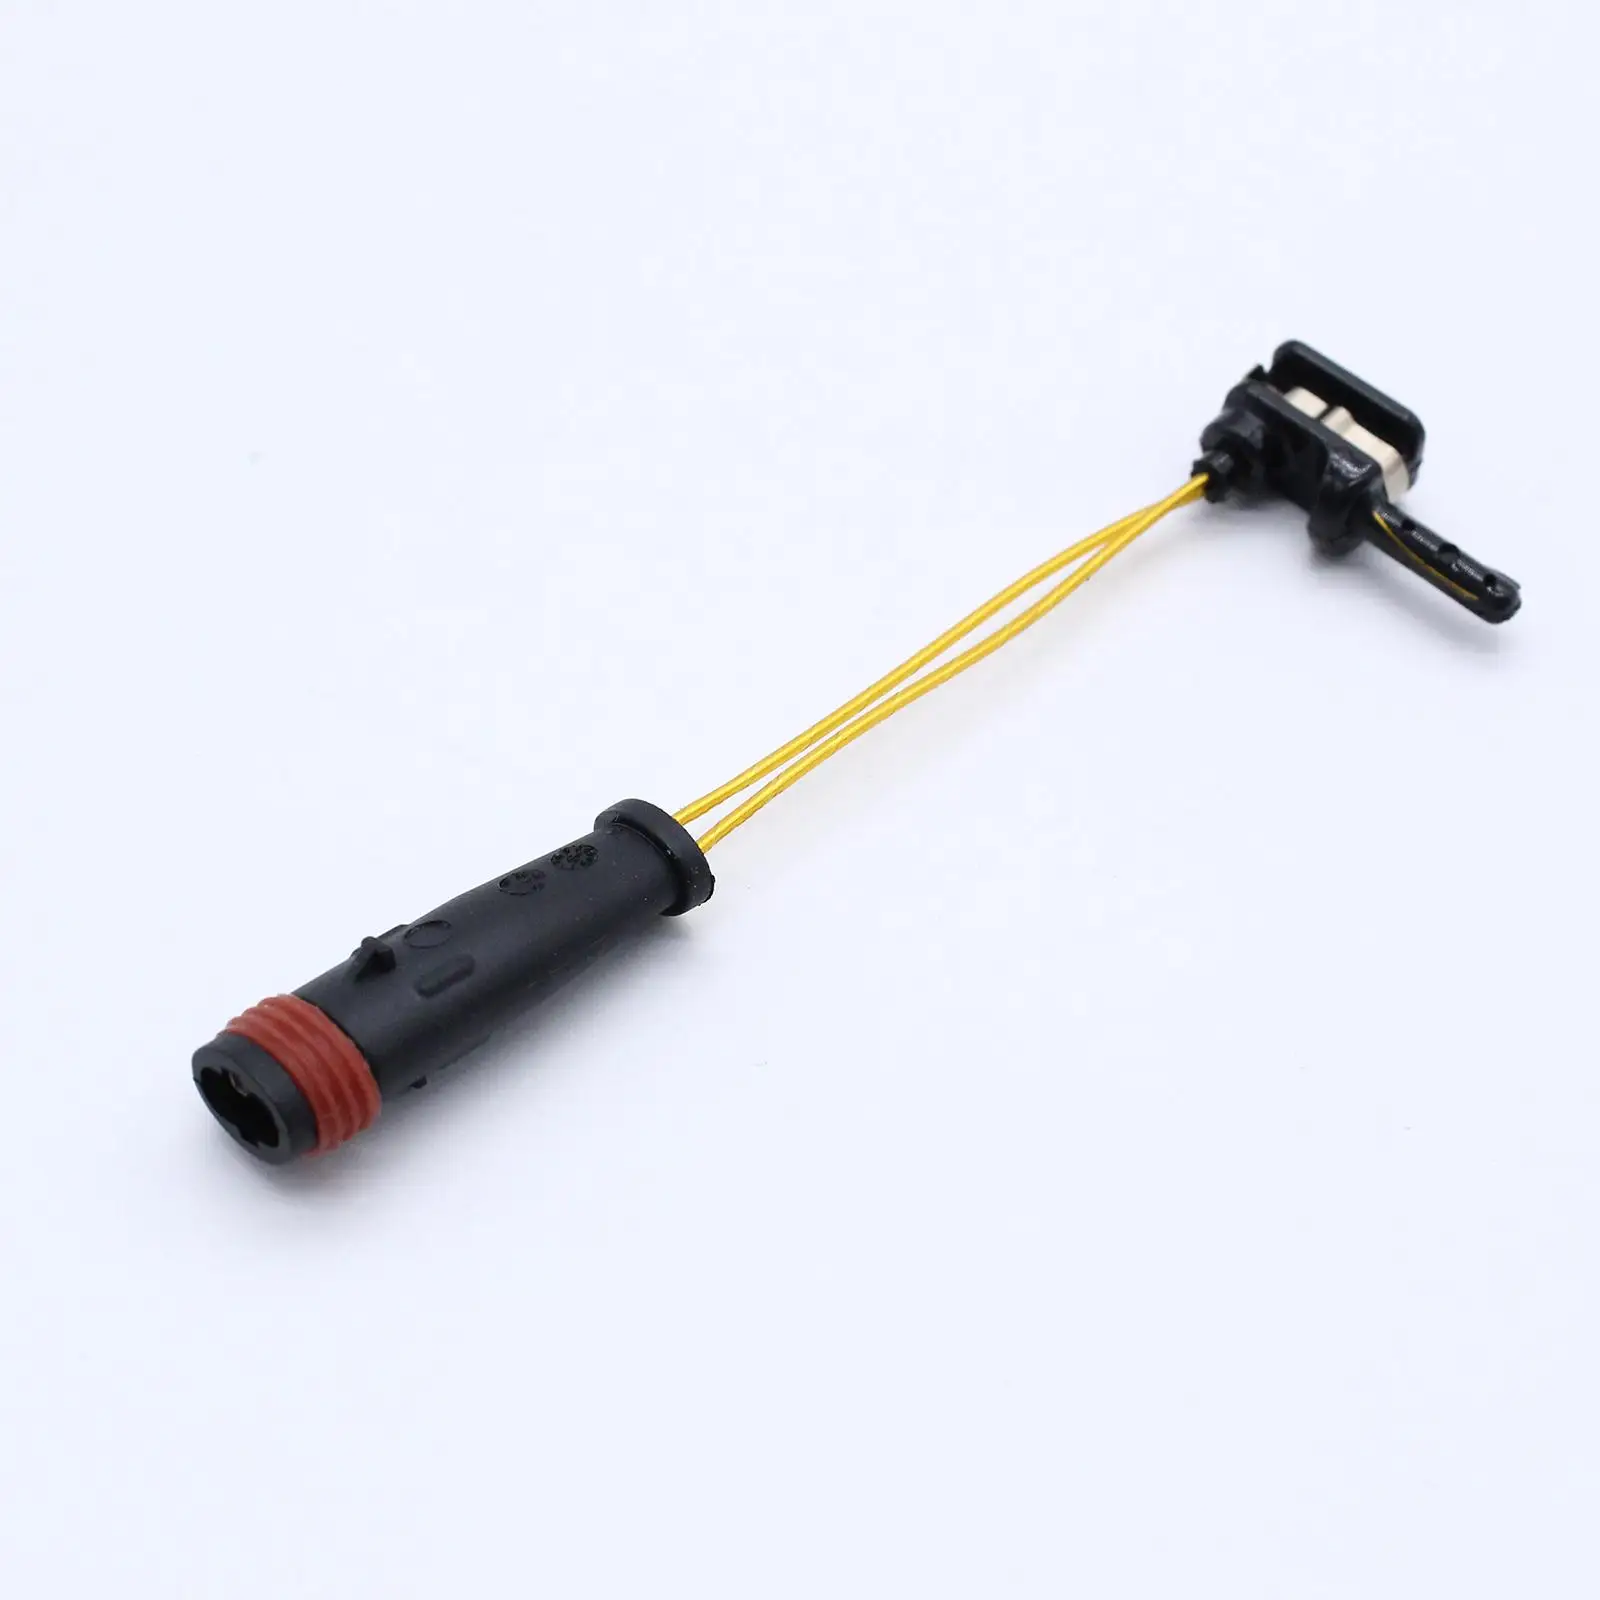 2115401717 Brake Pad Wear Sensor Fit for W203 W204 W211 CLK SL C E S Class Replacement